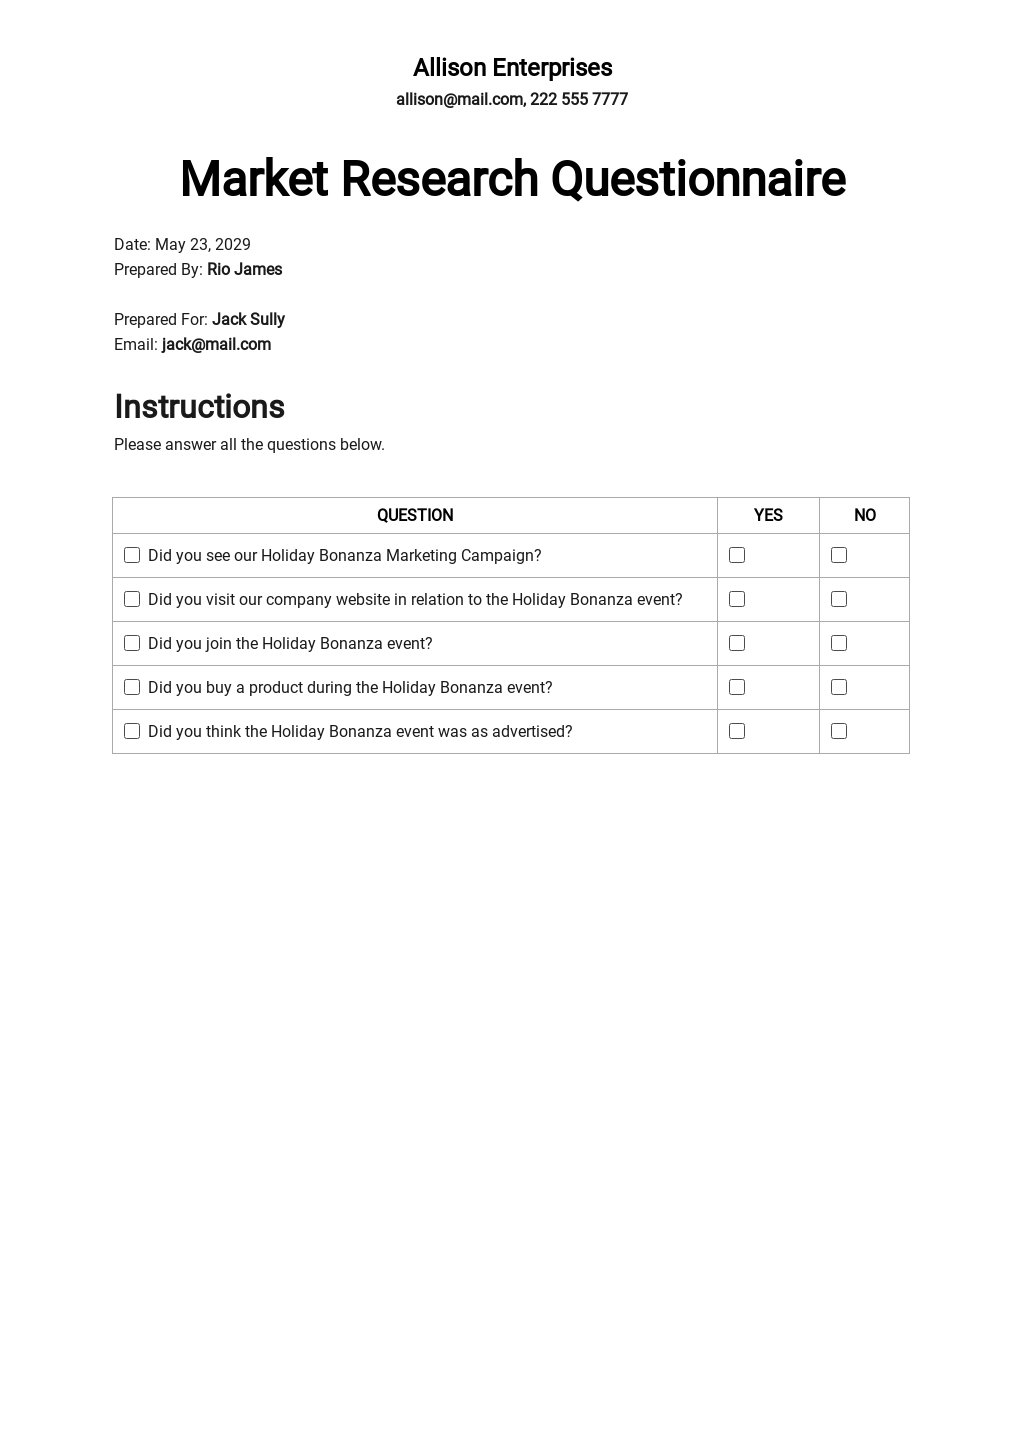 FREE Market Research Questionnaire Template - PDF | Word (DOC) | Apple